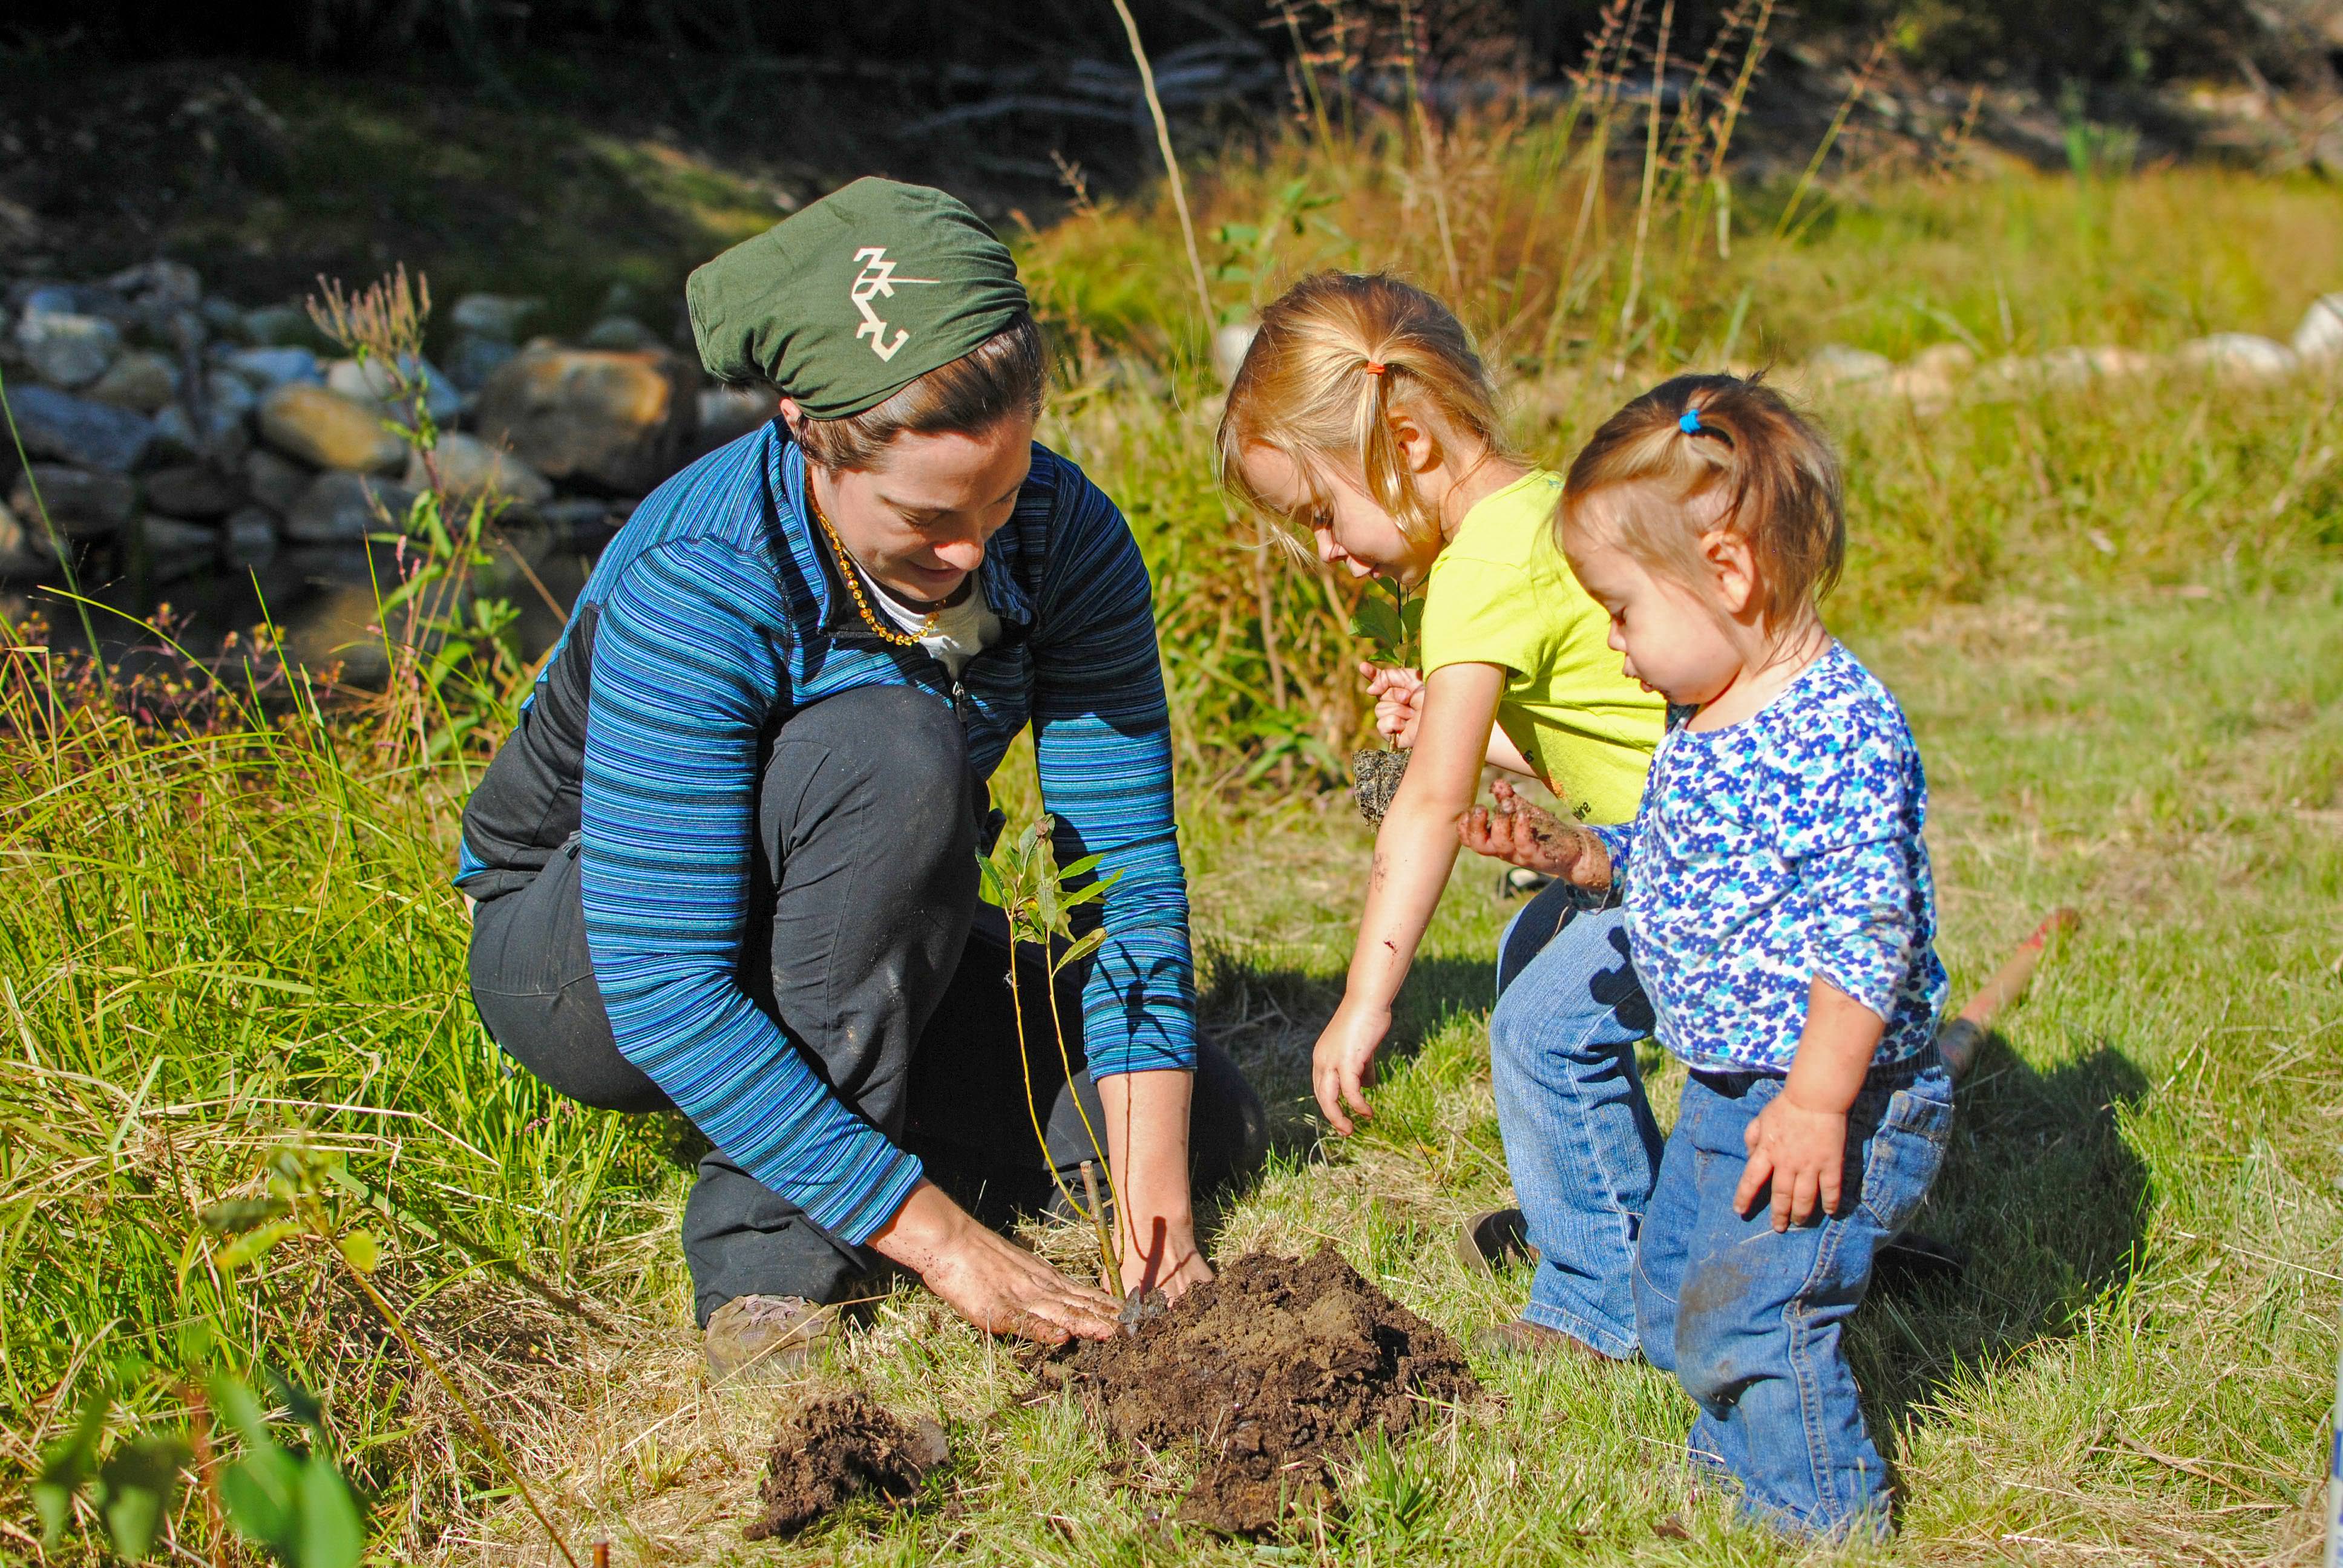 A volunteer plants a tree with help from two young children.